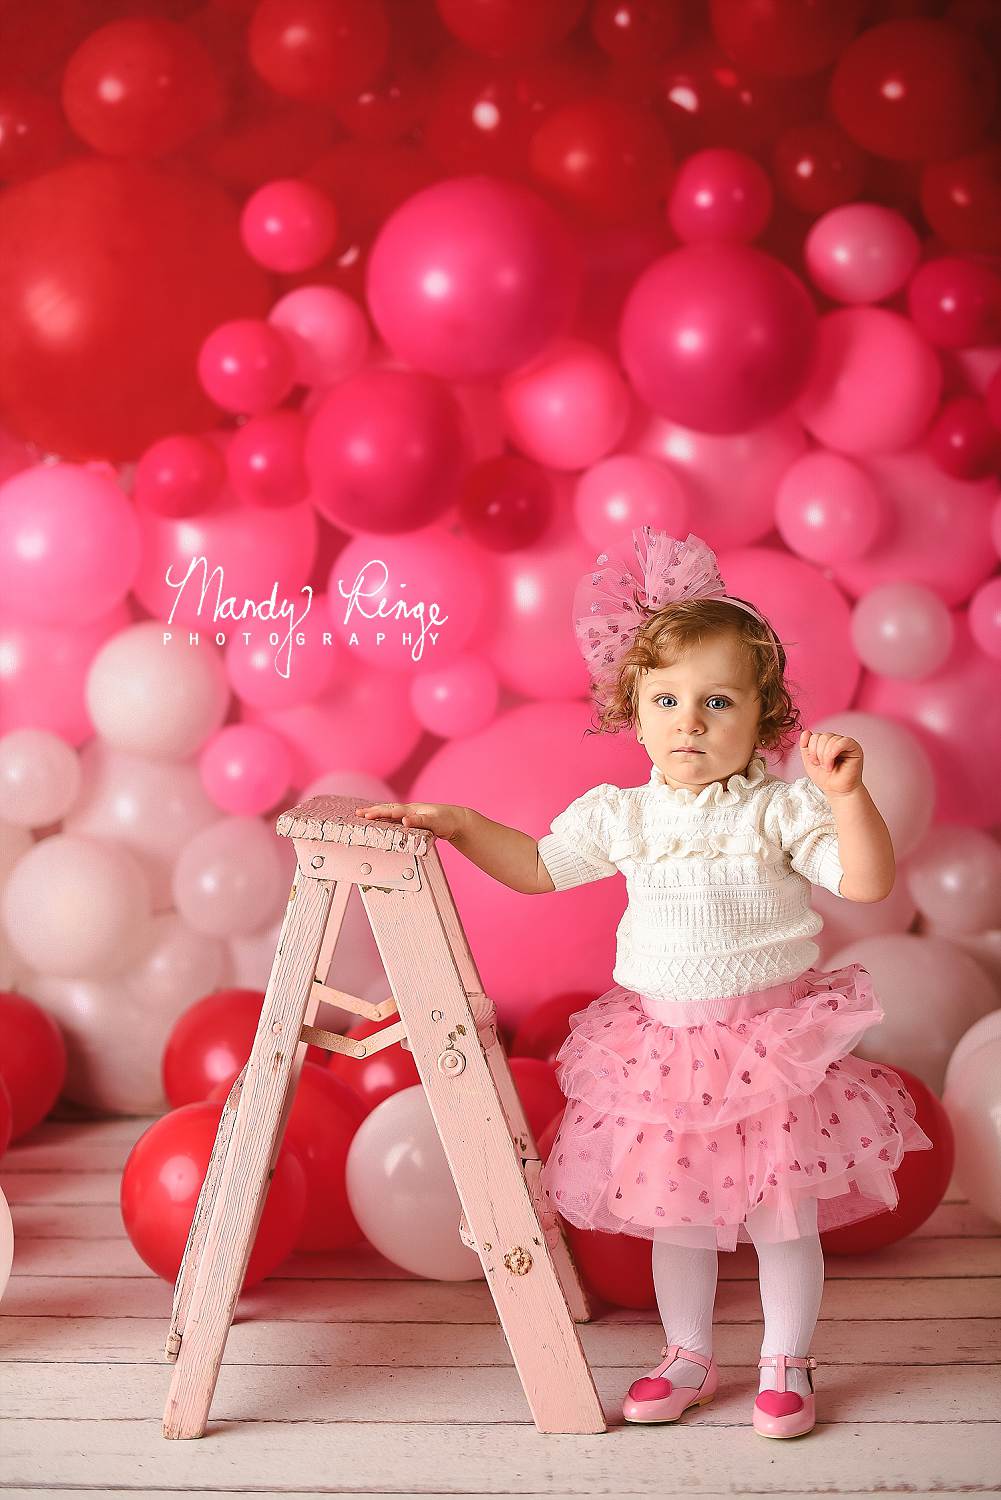 Kate Valentines Day Balloon Wall Backdrop for Photography Designed by Mandy Ringe Photography